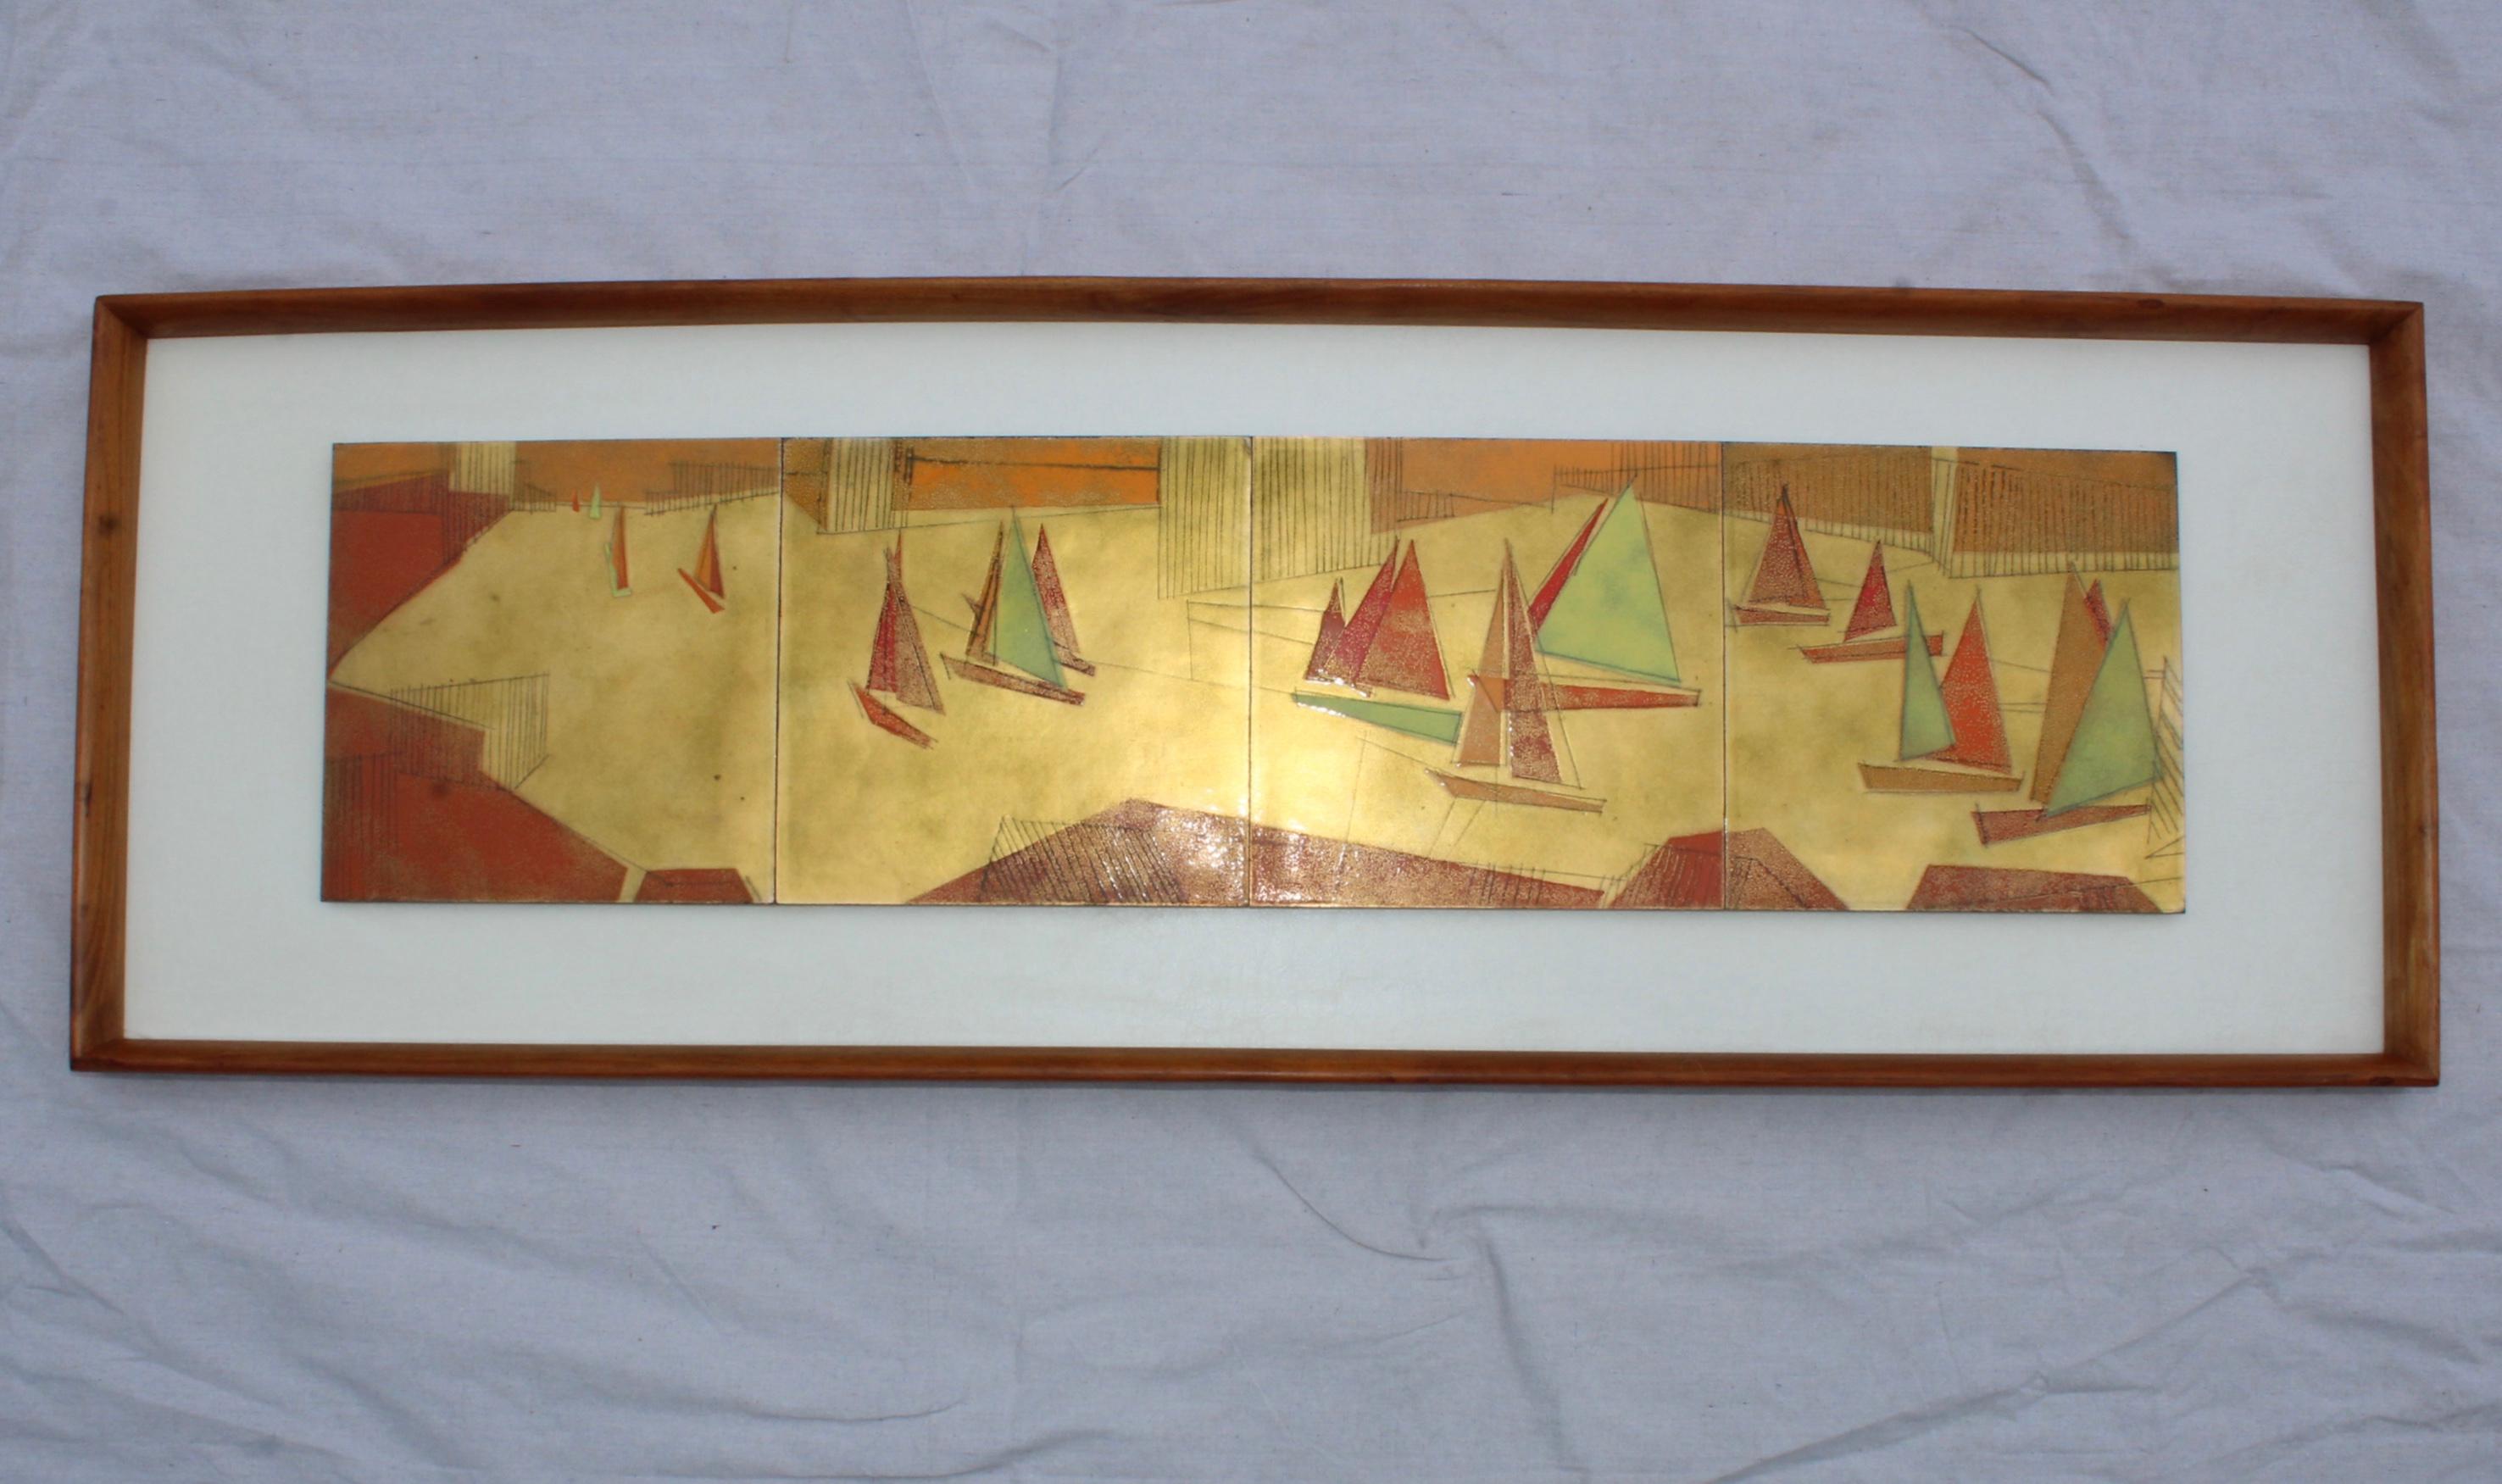 Stunning 1970s modern sailboats wall artwork on enamel. With wood frame.